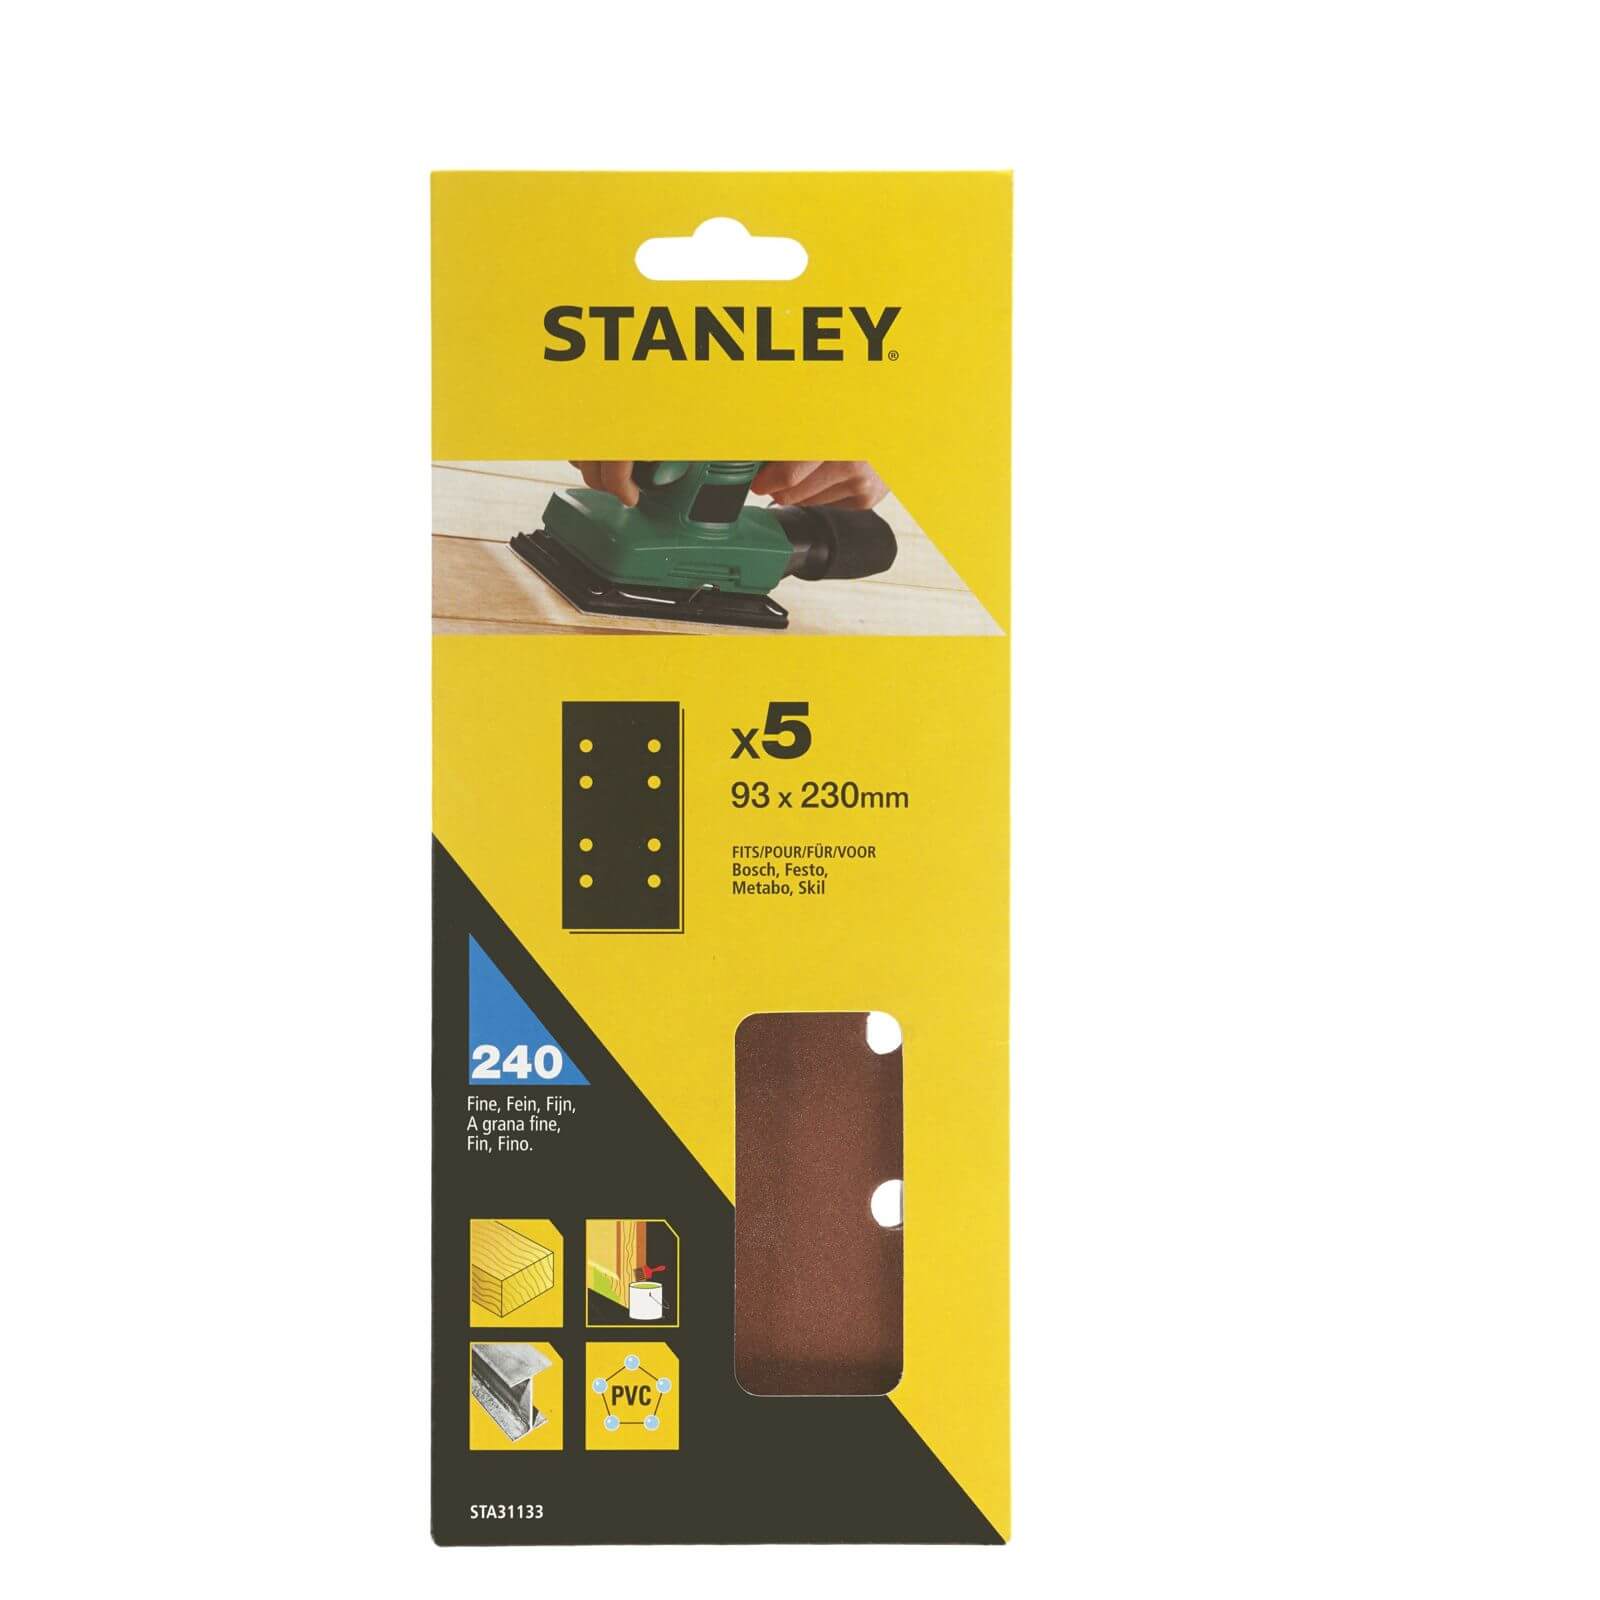 Stanley 1/3 Sheet Sander Punched Wire Clip 240G Sanding Sheets